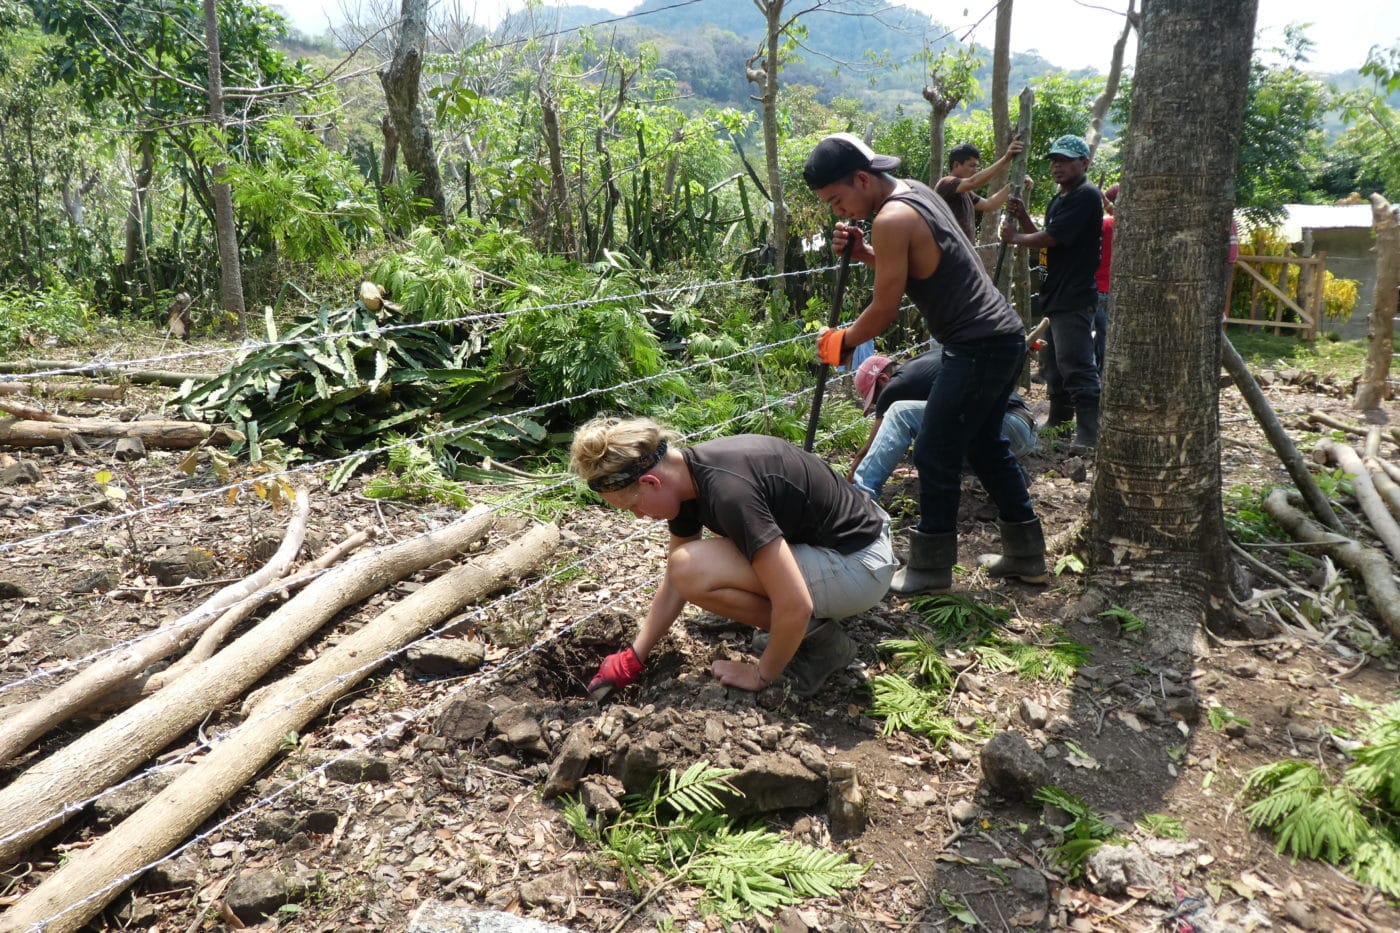 Working hard on WASH project in Valle de Casas.